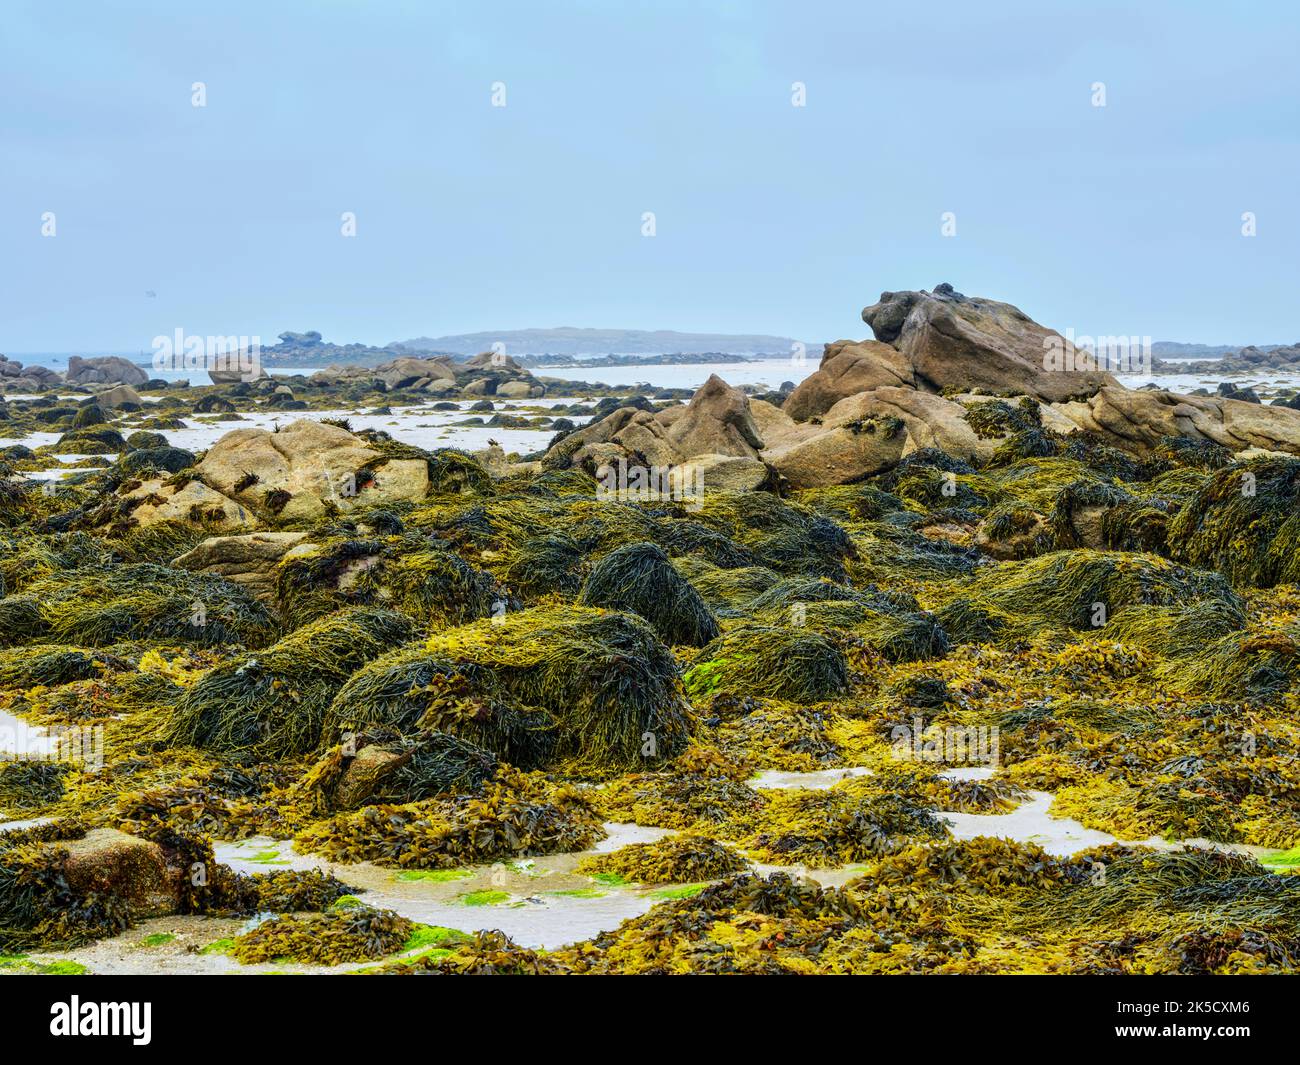 Low tide at Landeda beach, Brittany, France Stock Photo